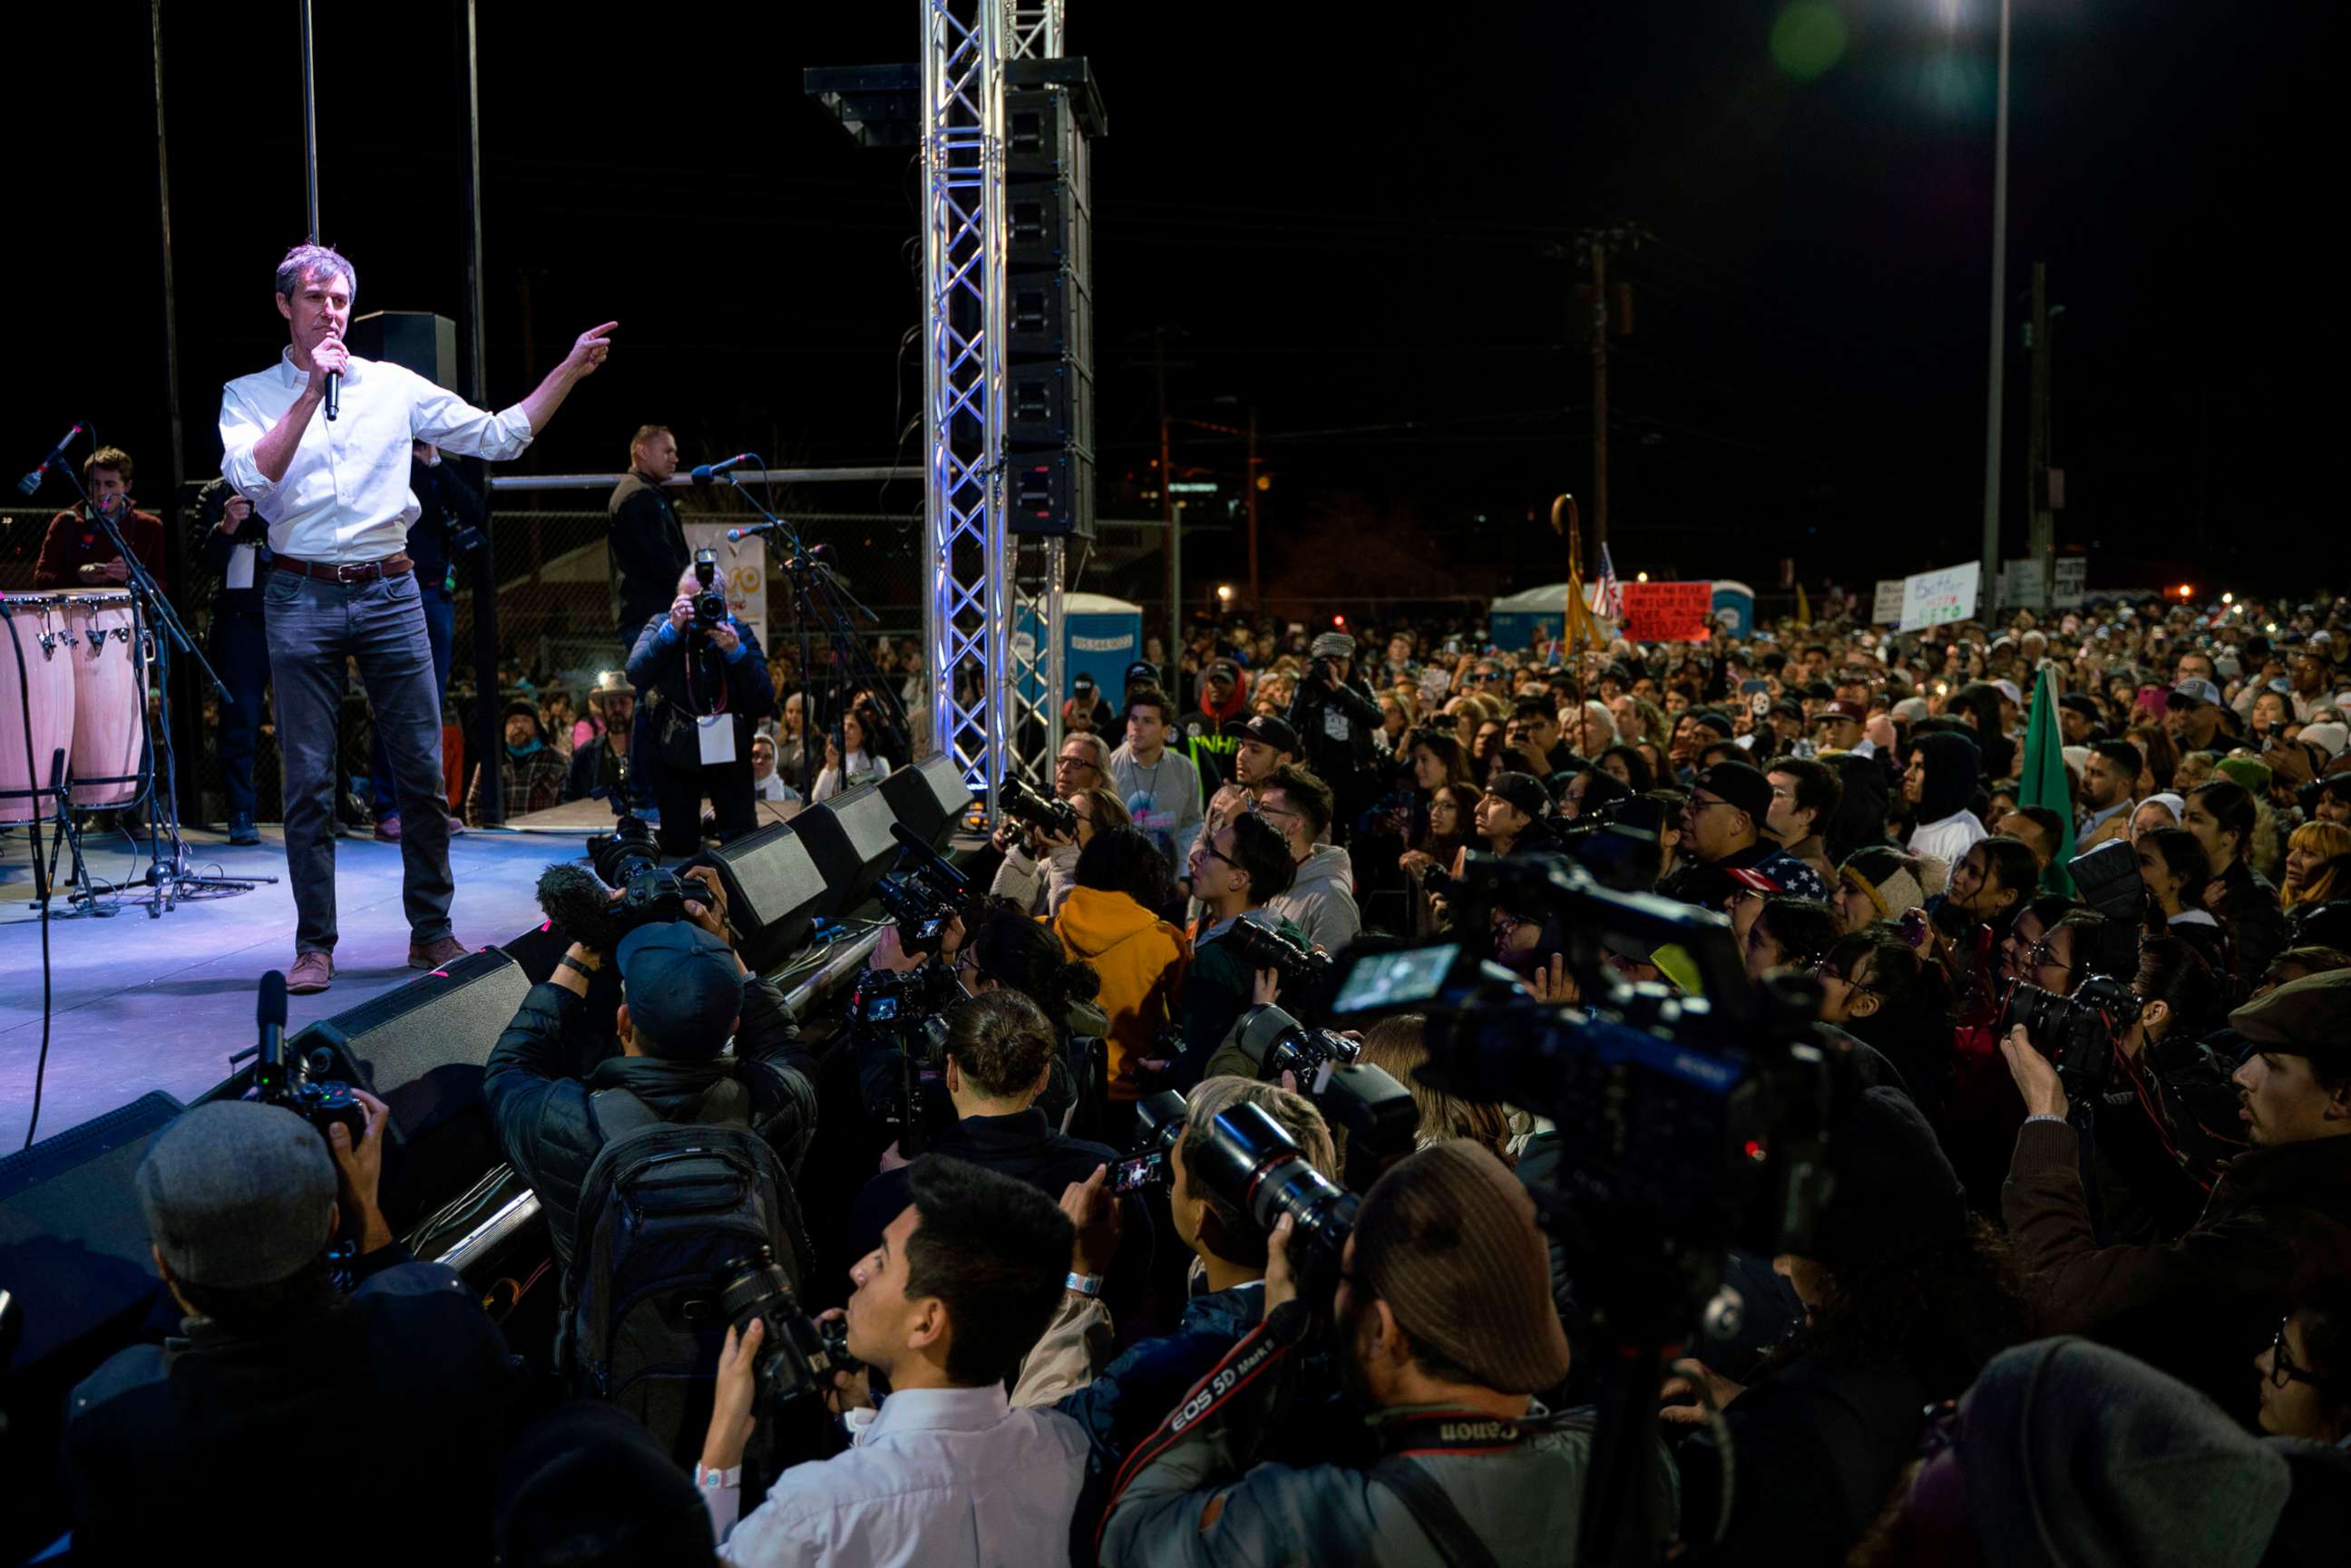 PHOTO: Former Texas Congressman Beto O'Rourke speaks to a crowd of supporters at Chalio Acosta Sports Center at the end of the anti-Trump "March for Truth" in El Paso, Texas, Feb. 11, 2019.